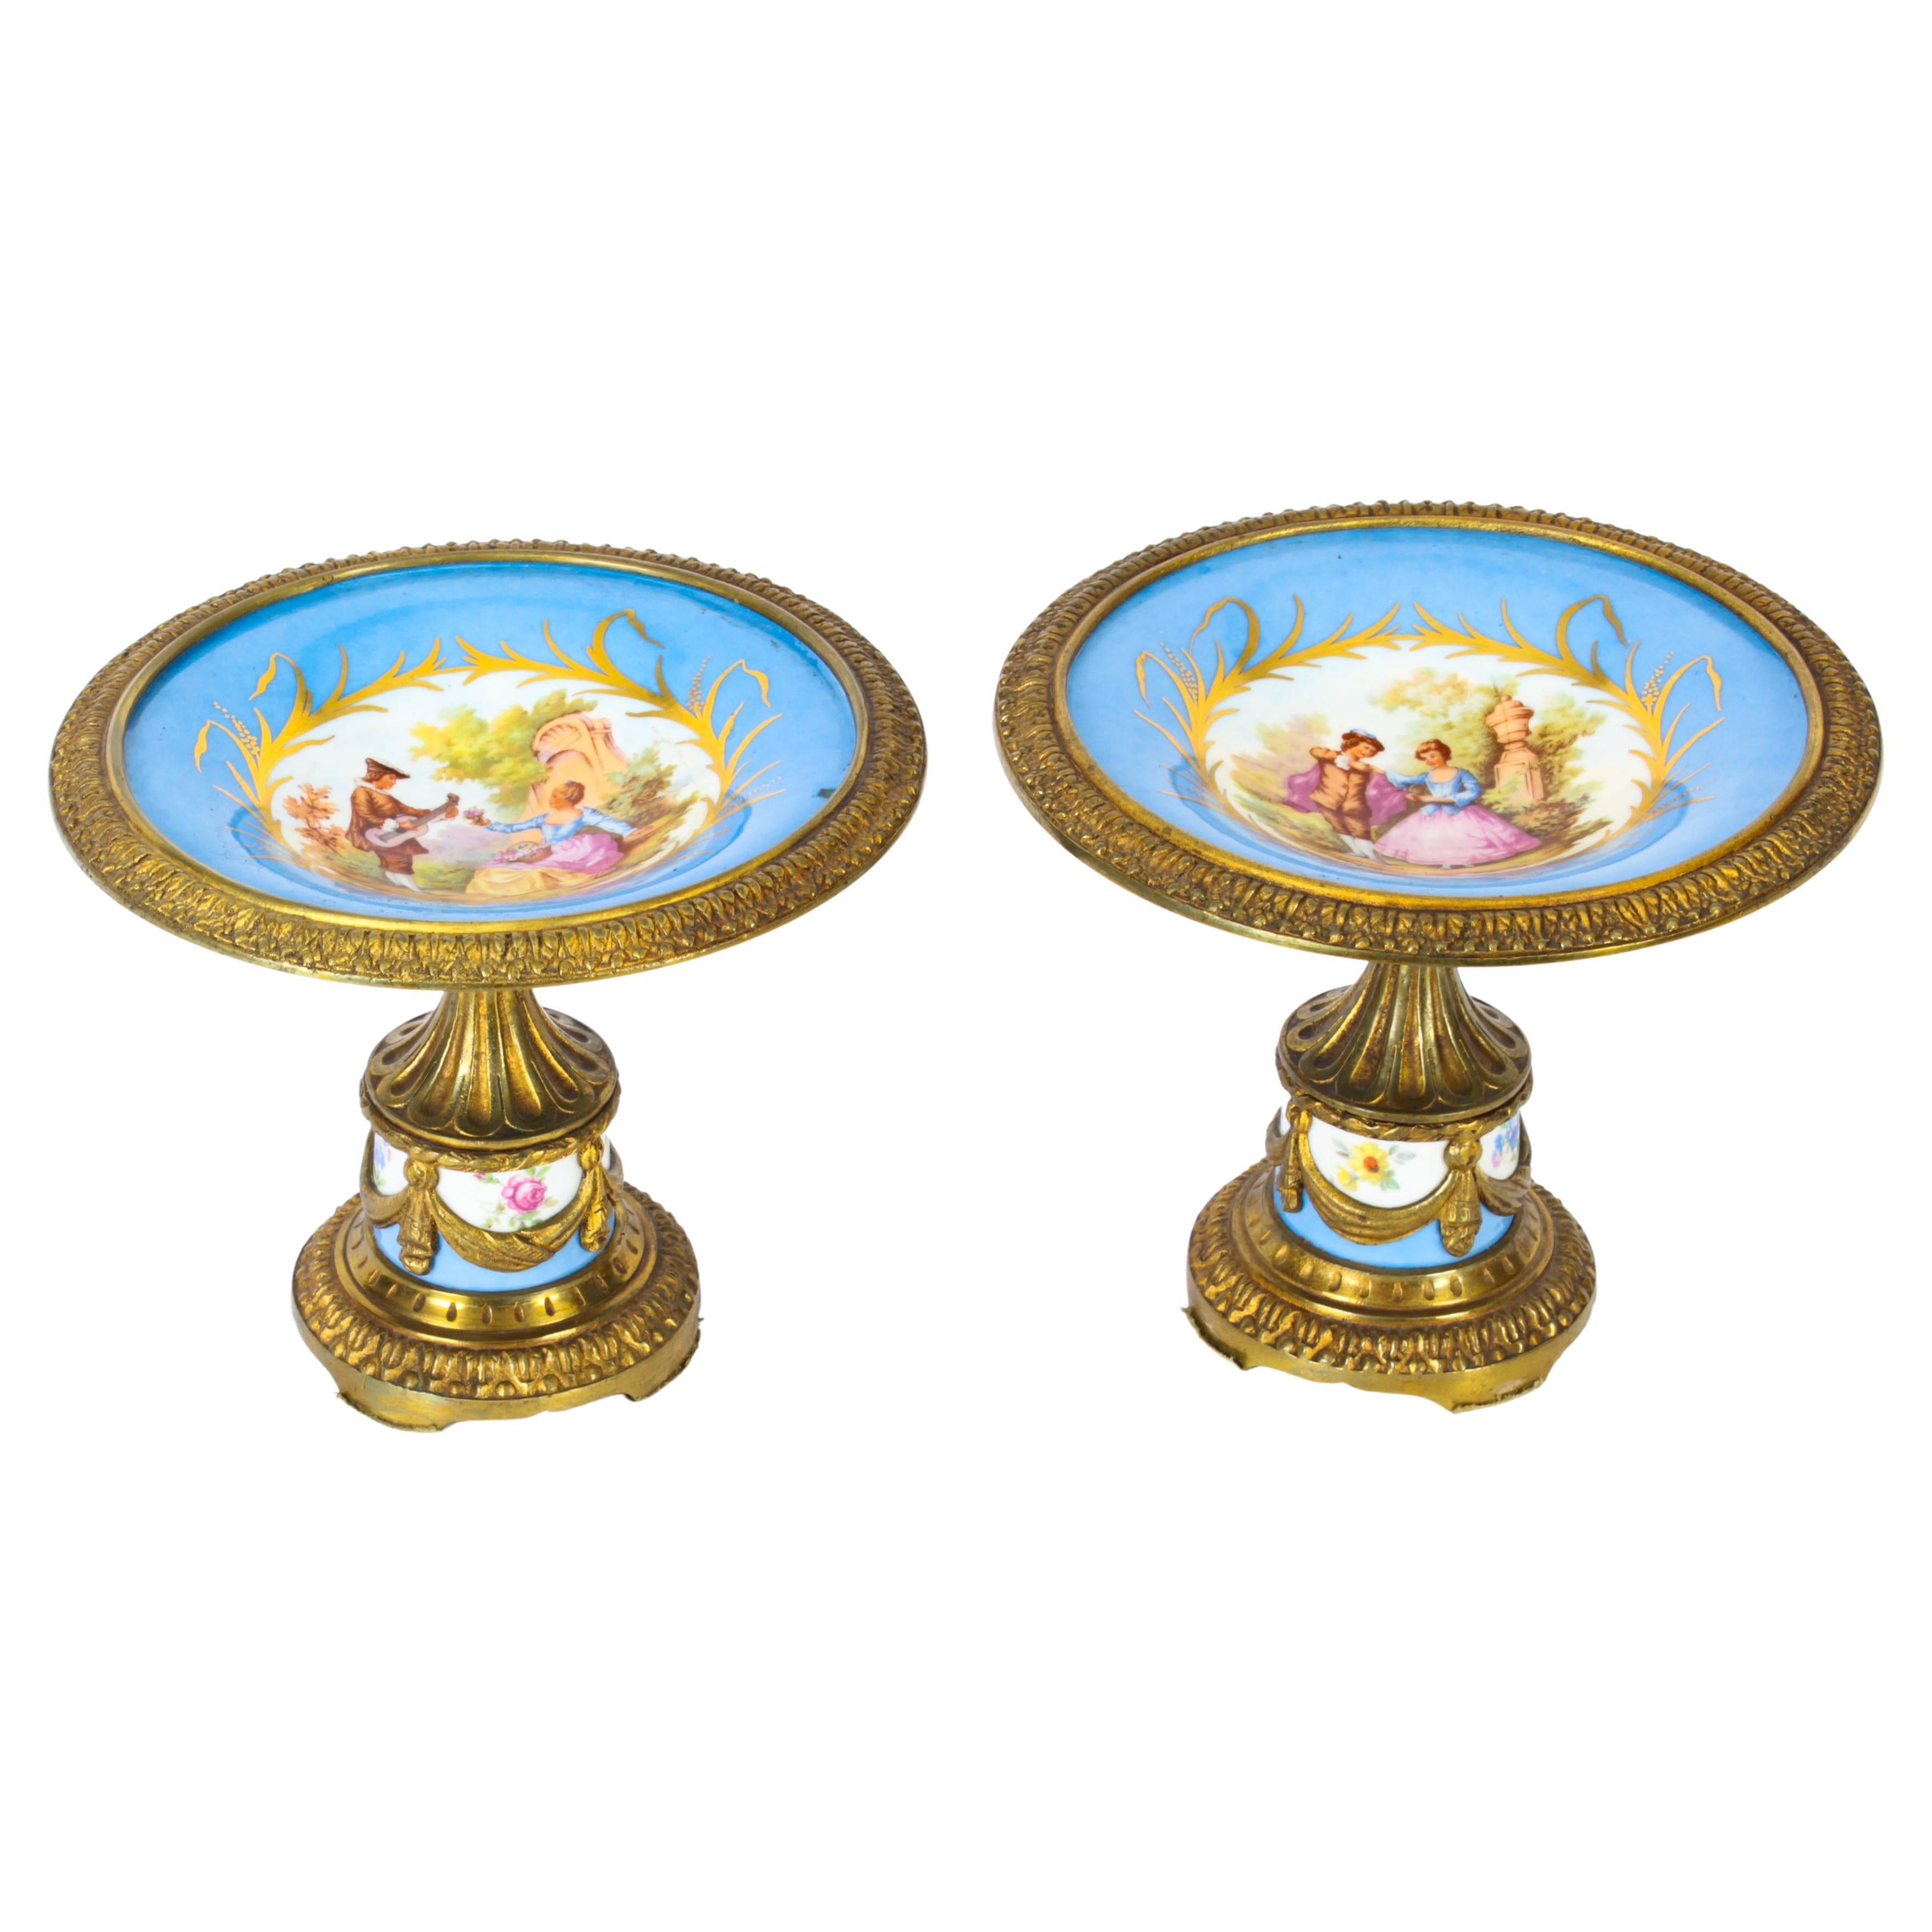 Antique Pair French Ormolu Mounted Sevres Porcelain Tazzas 19th C